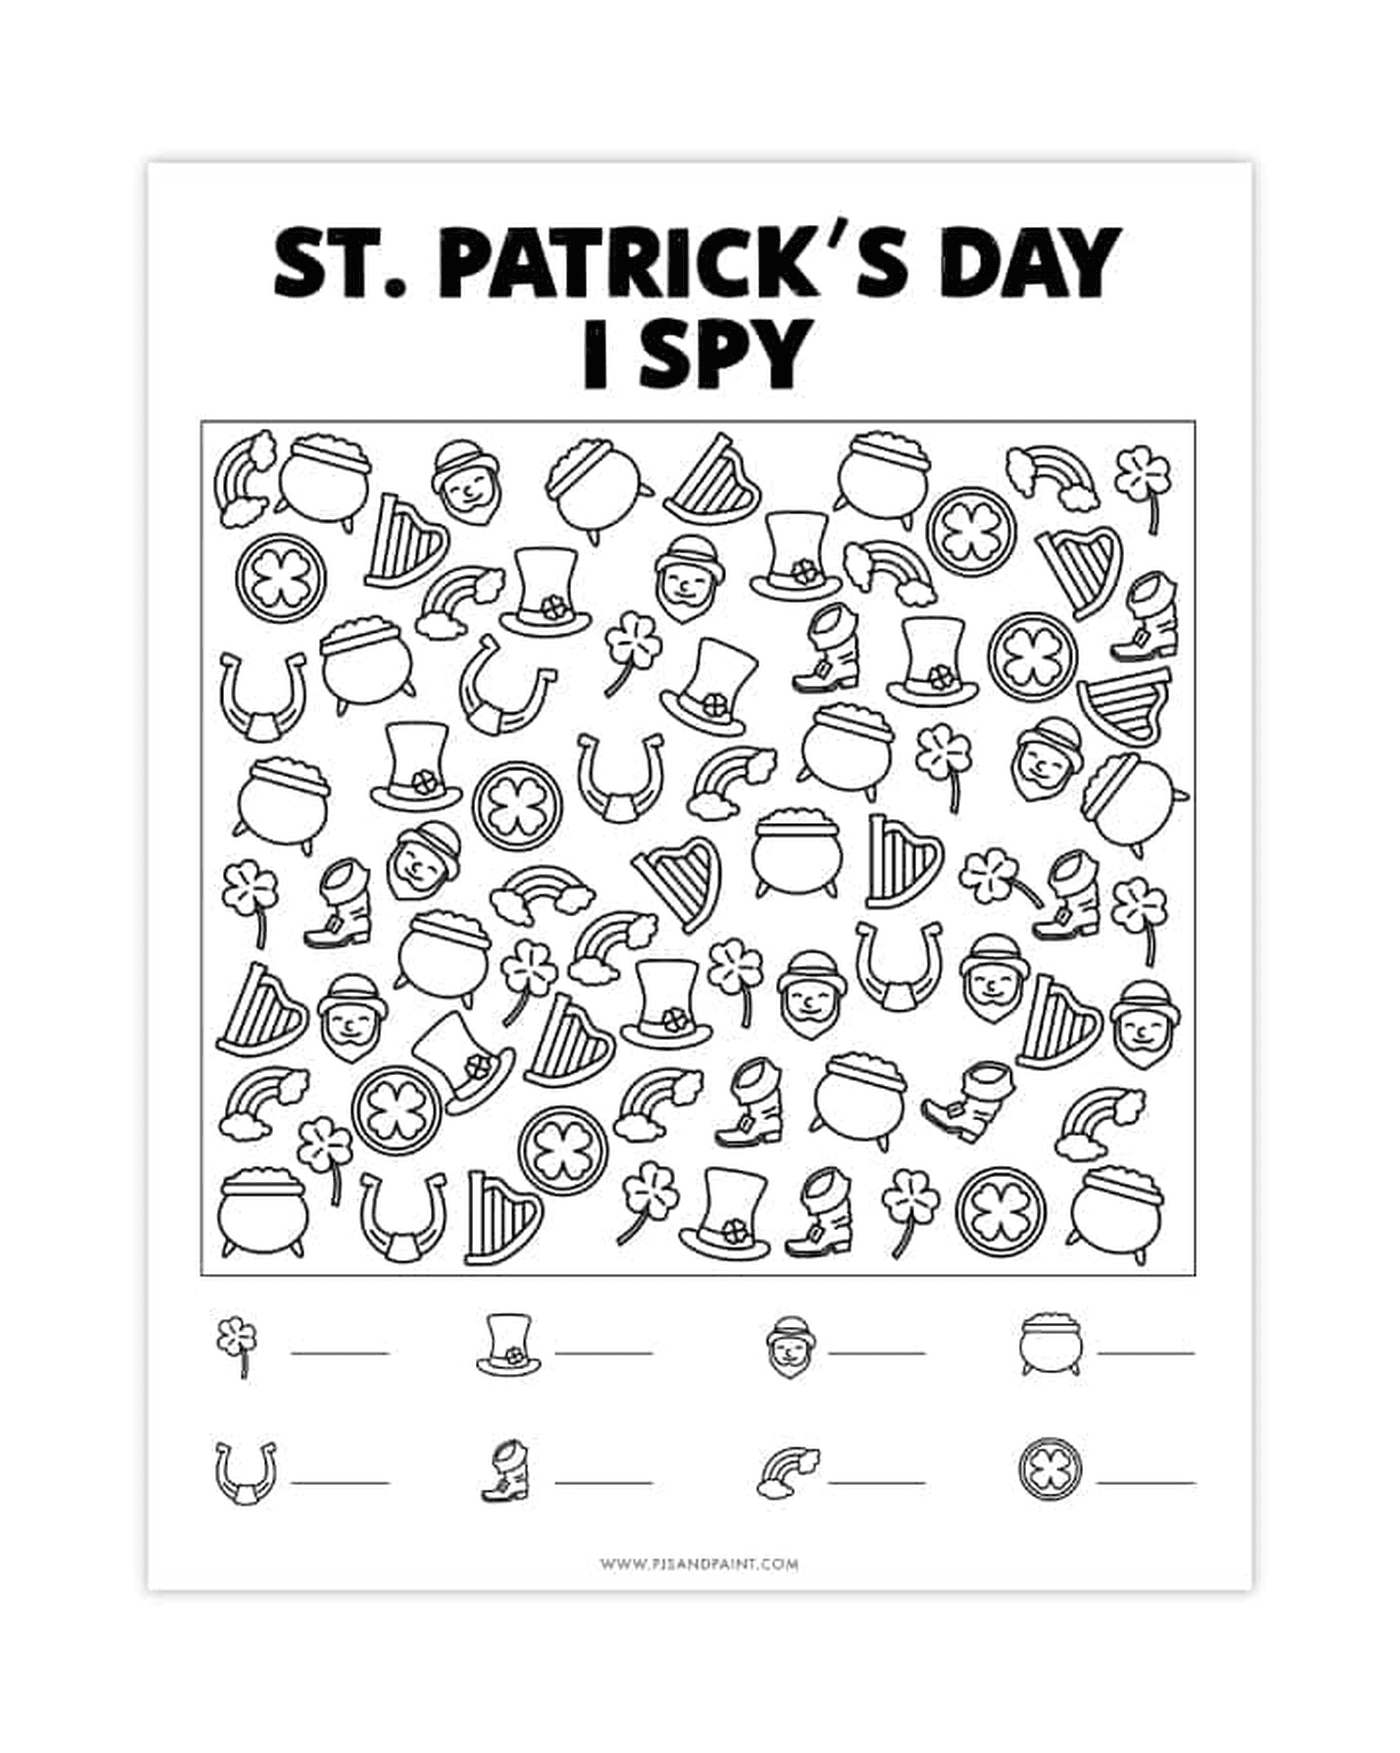  St Patricks Day I Spy Game Search and find 